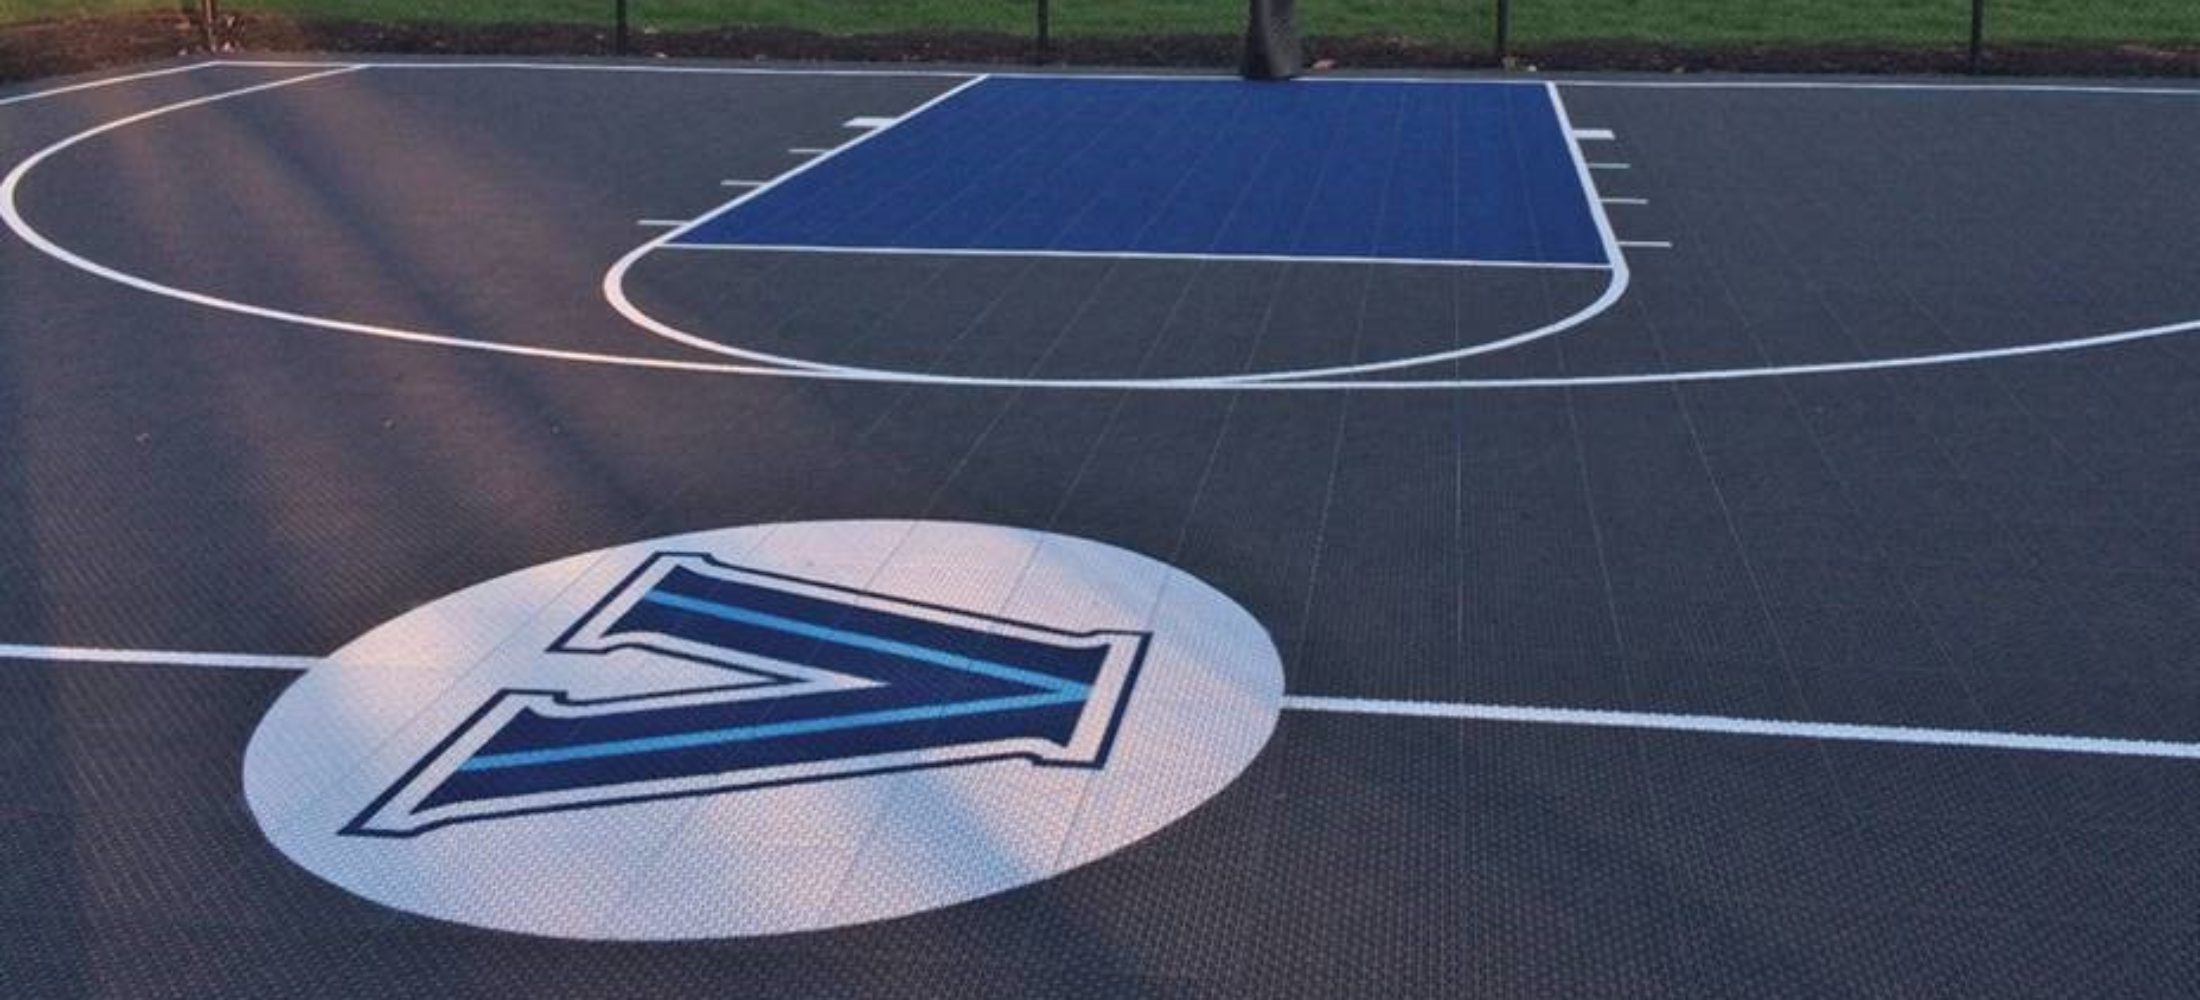 Traditional Sport Court Resurfacing Repair: Step by Step